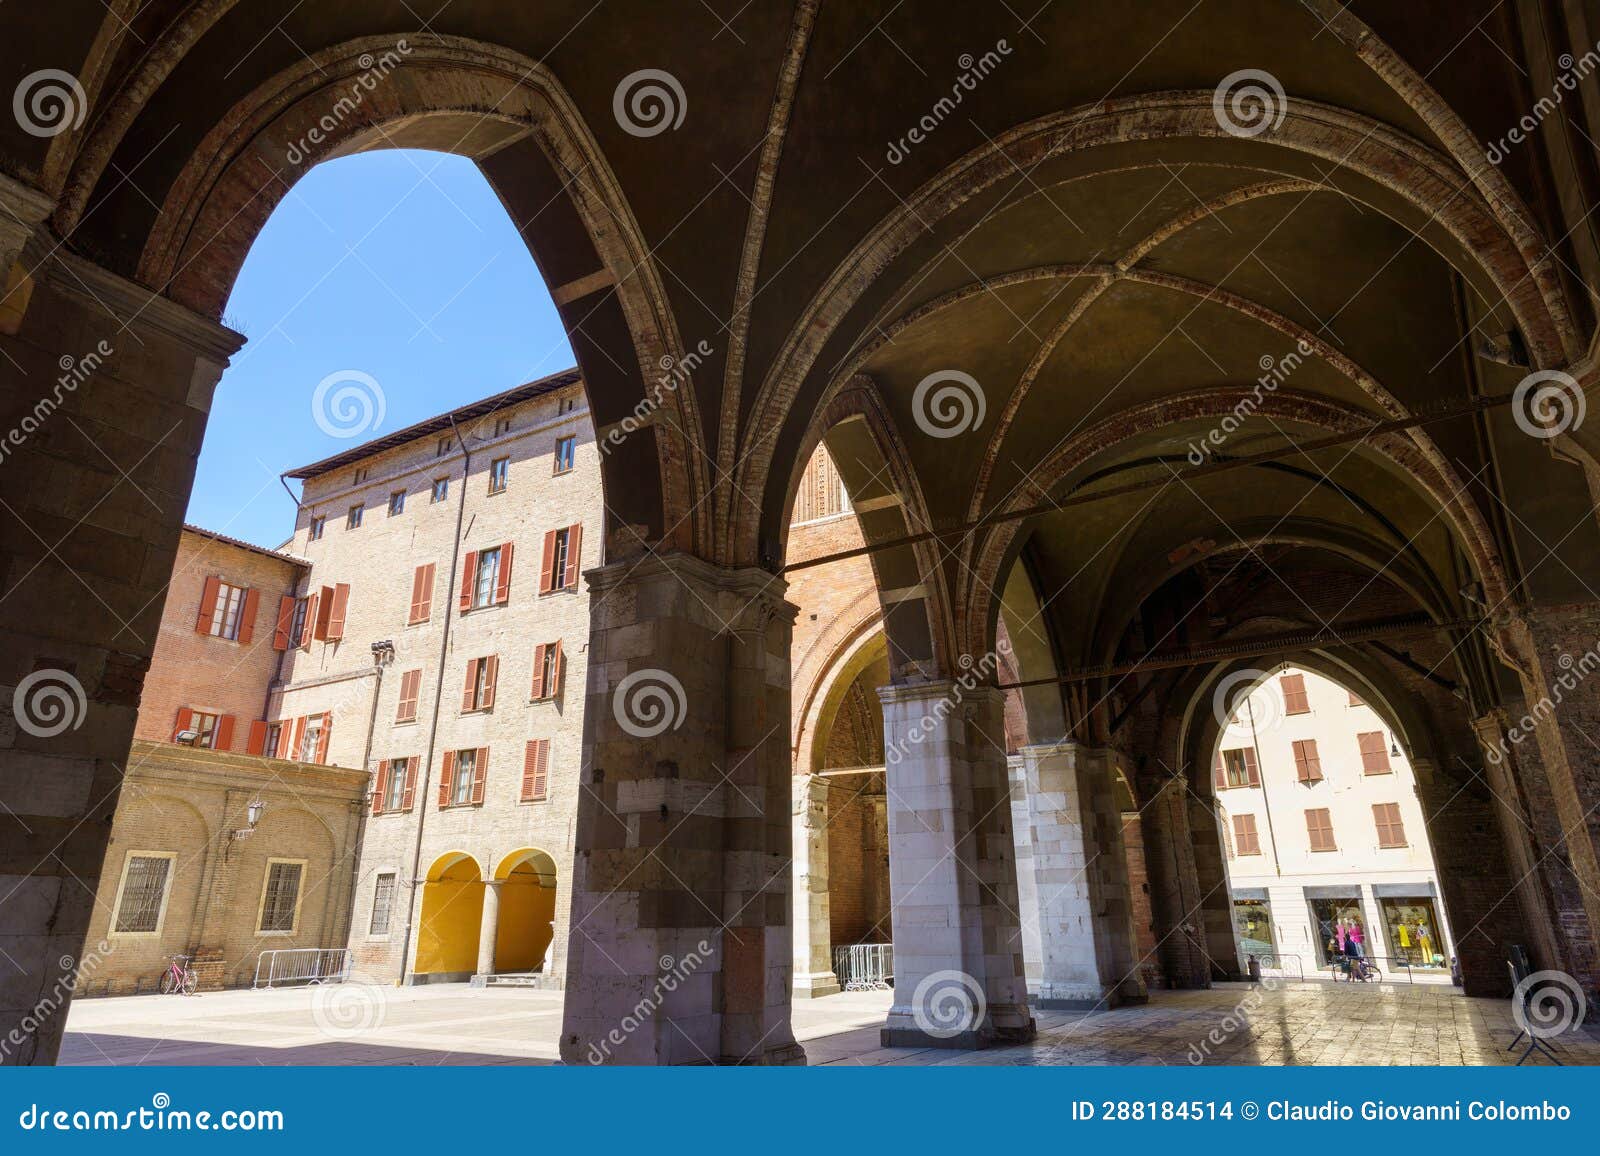 piacenza: medieval palace known as 